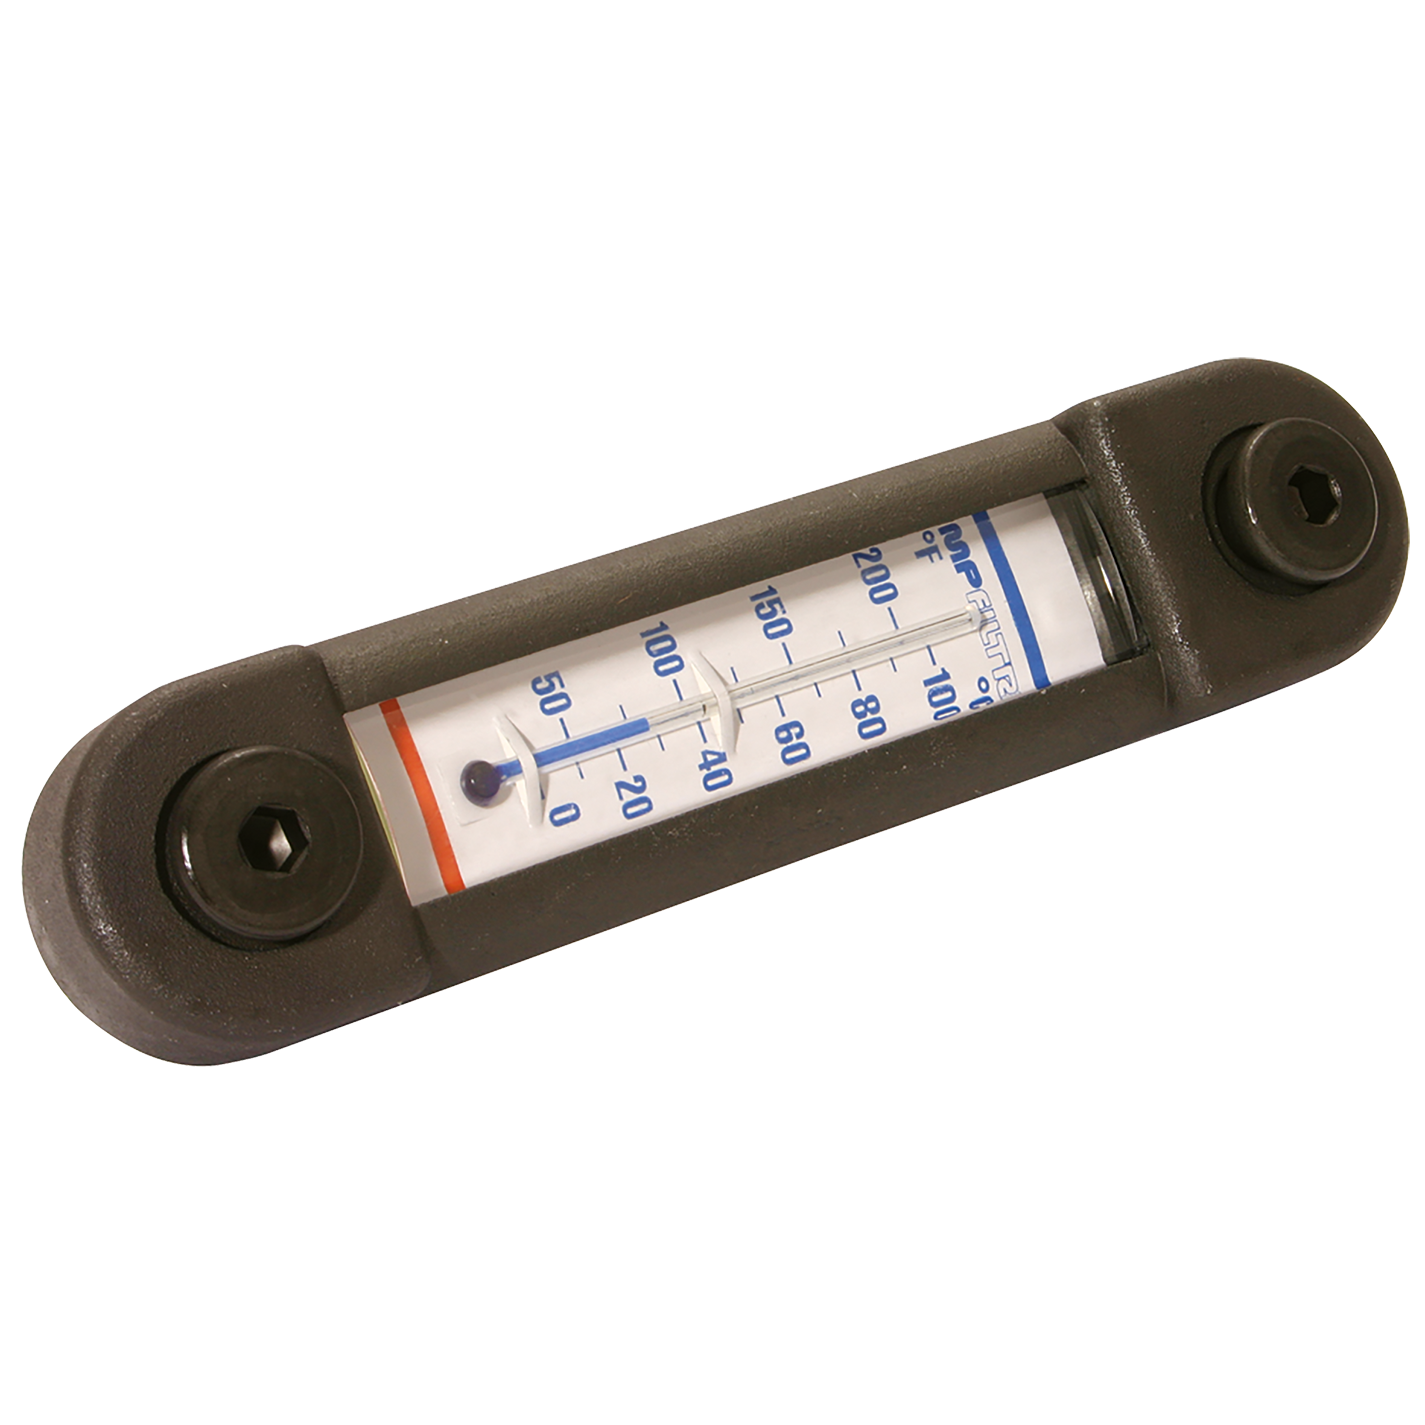 254mm Level Gauge With Thermometer M10 Bolt Thread